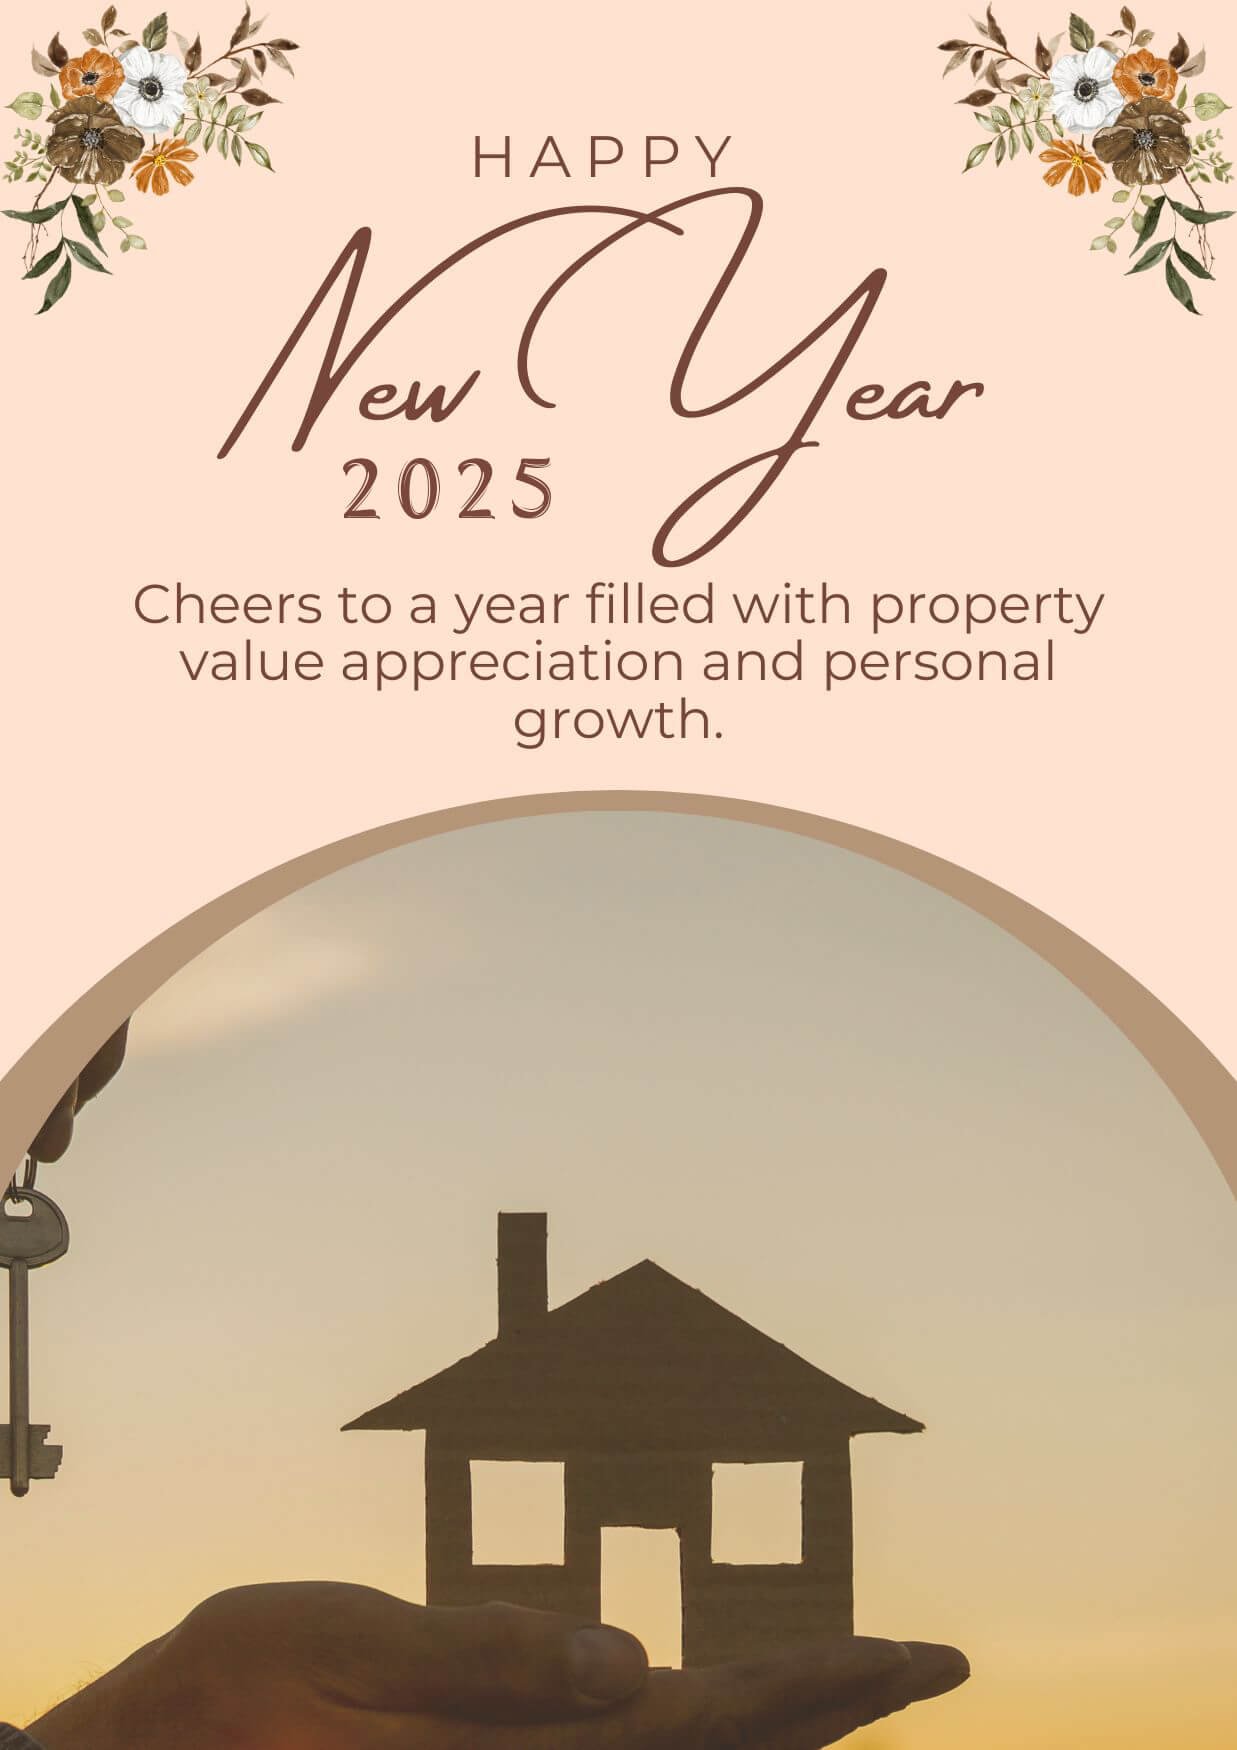 2025 Happy New Year Wishes For Real Estate Status